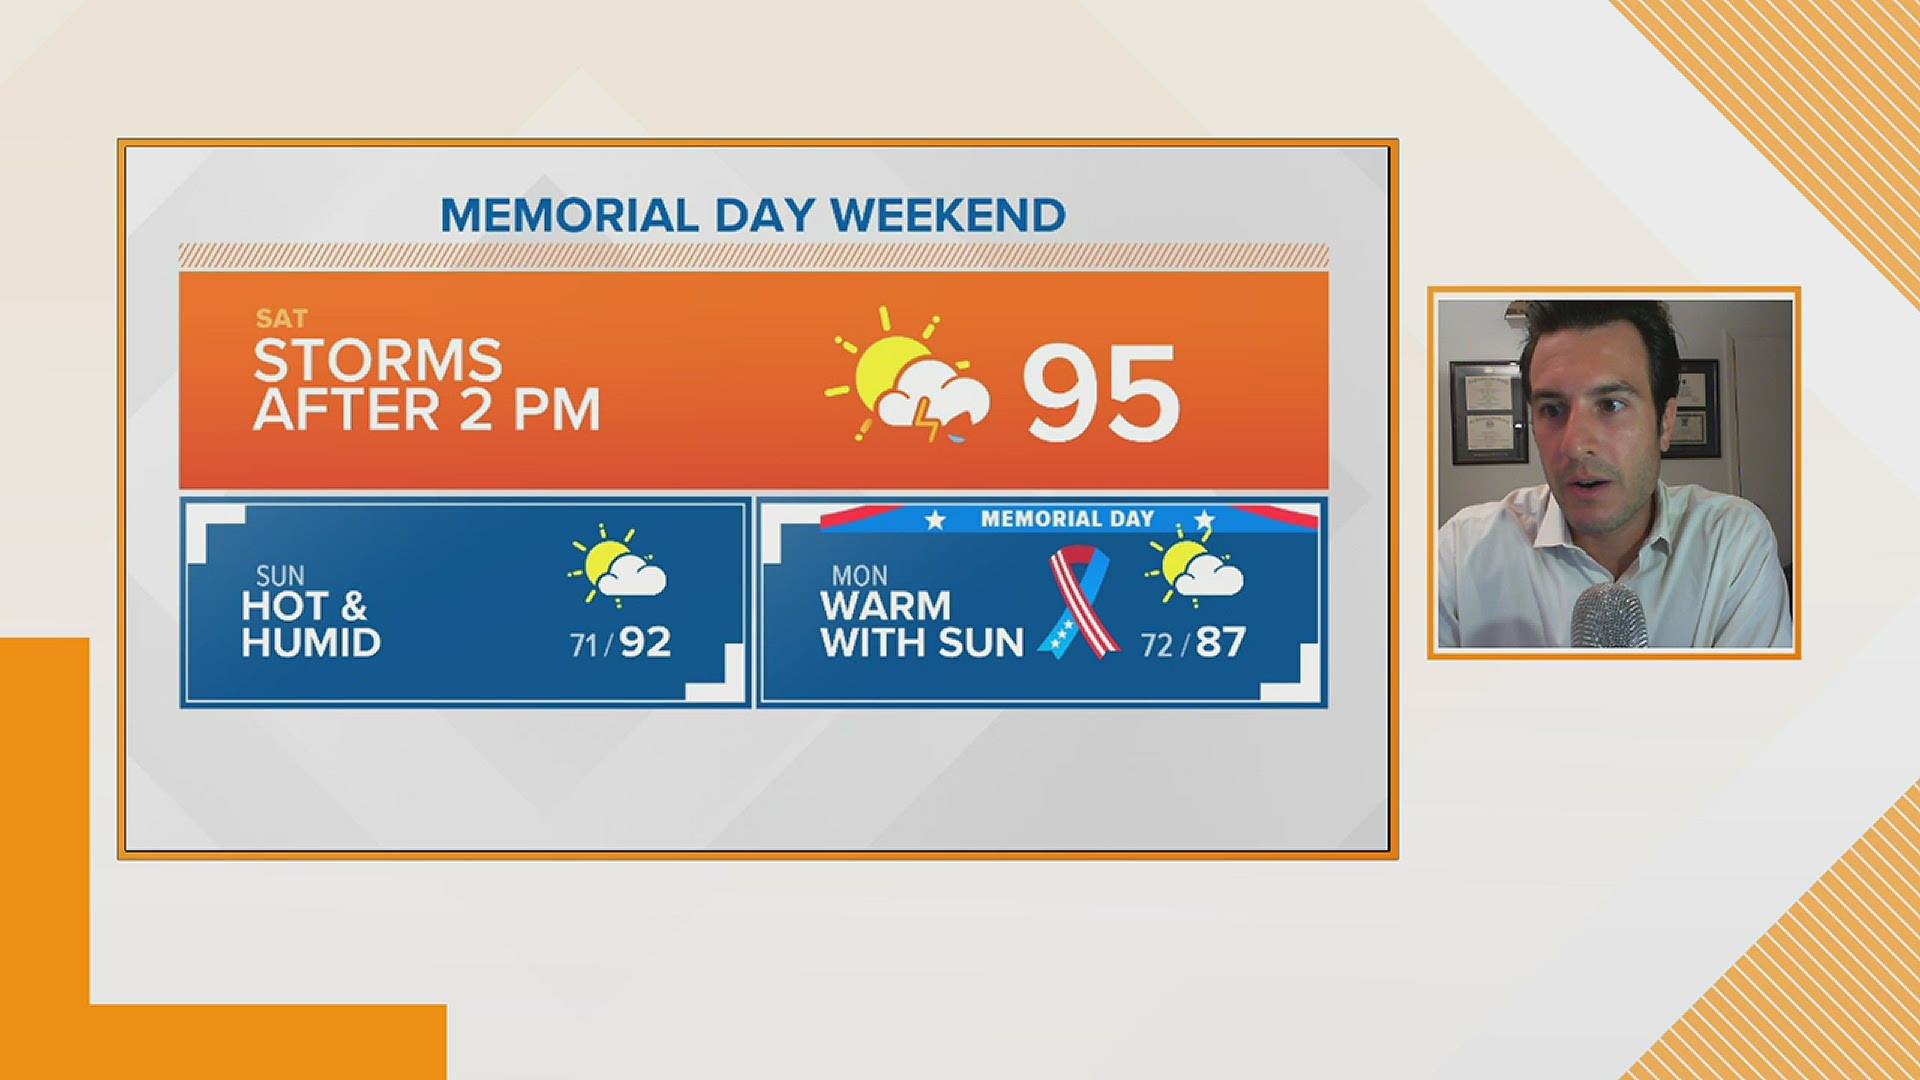 Hot and humid this weekend! 90s with sun on Saturday as storms fire after 2 pm.